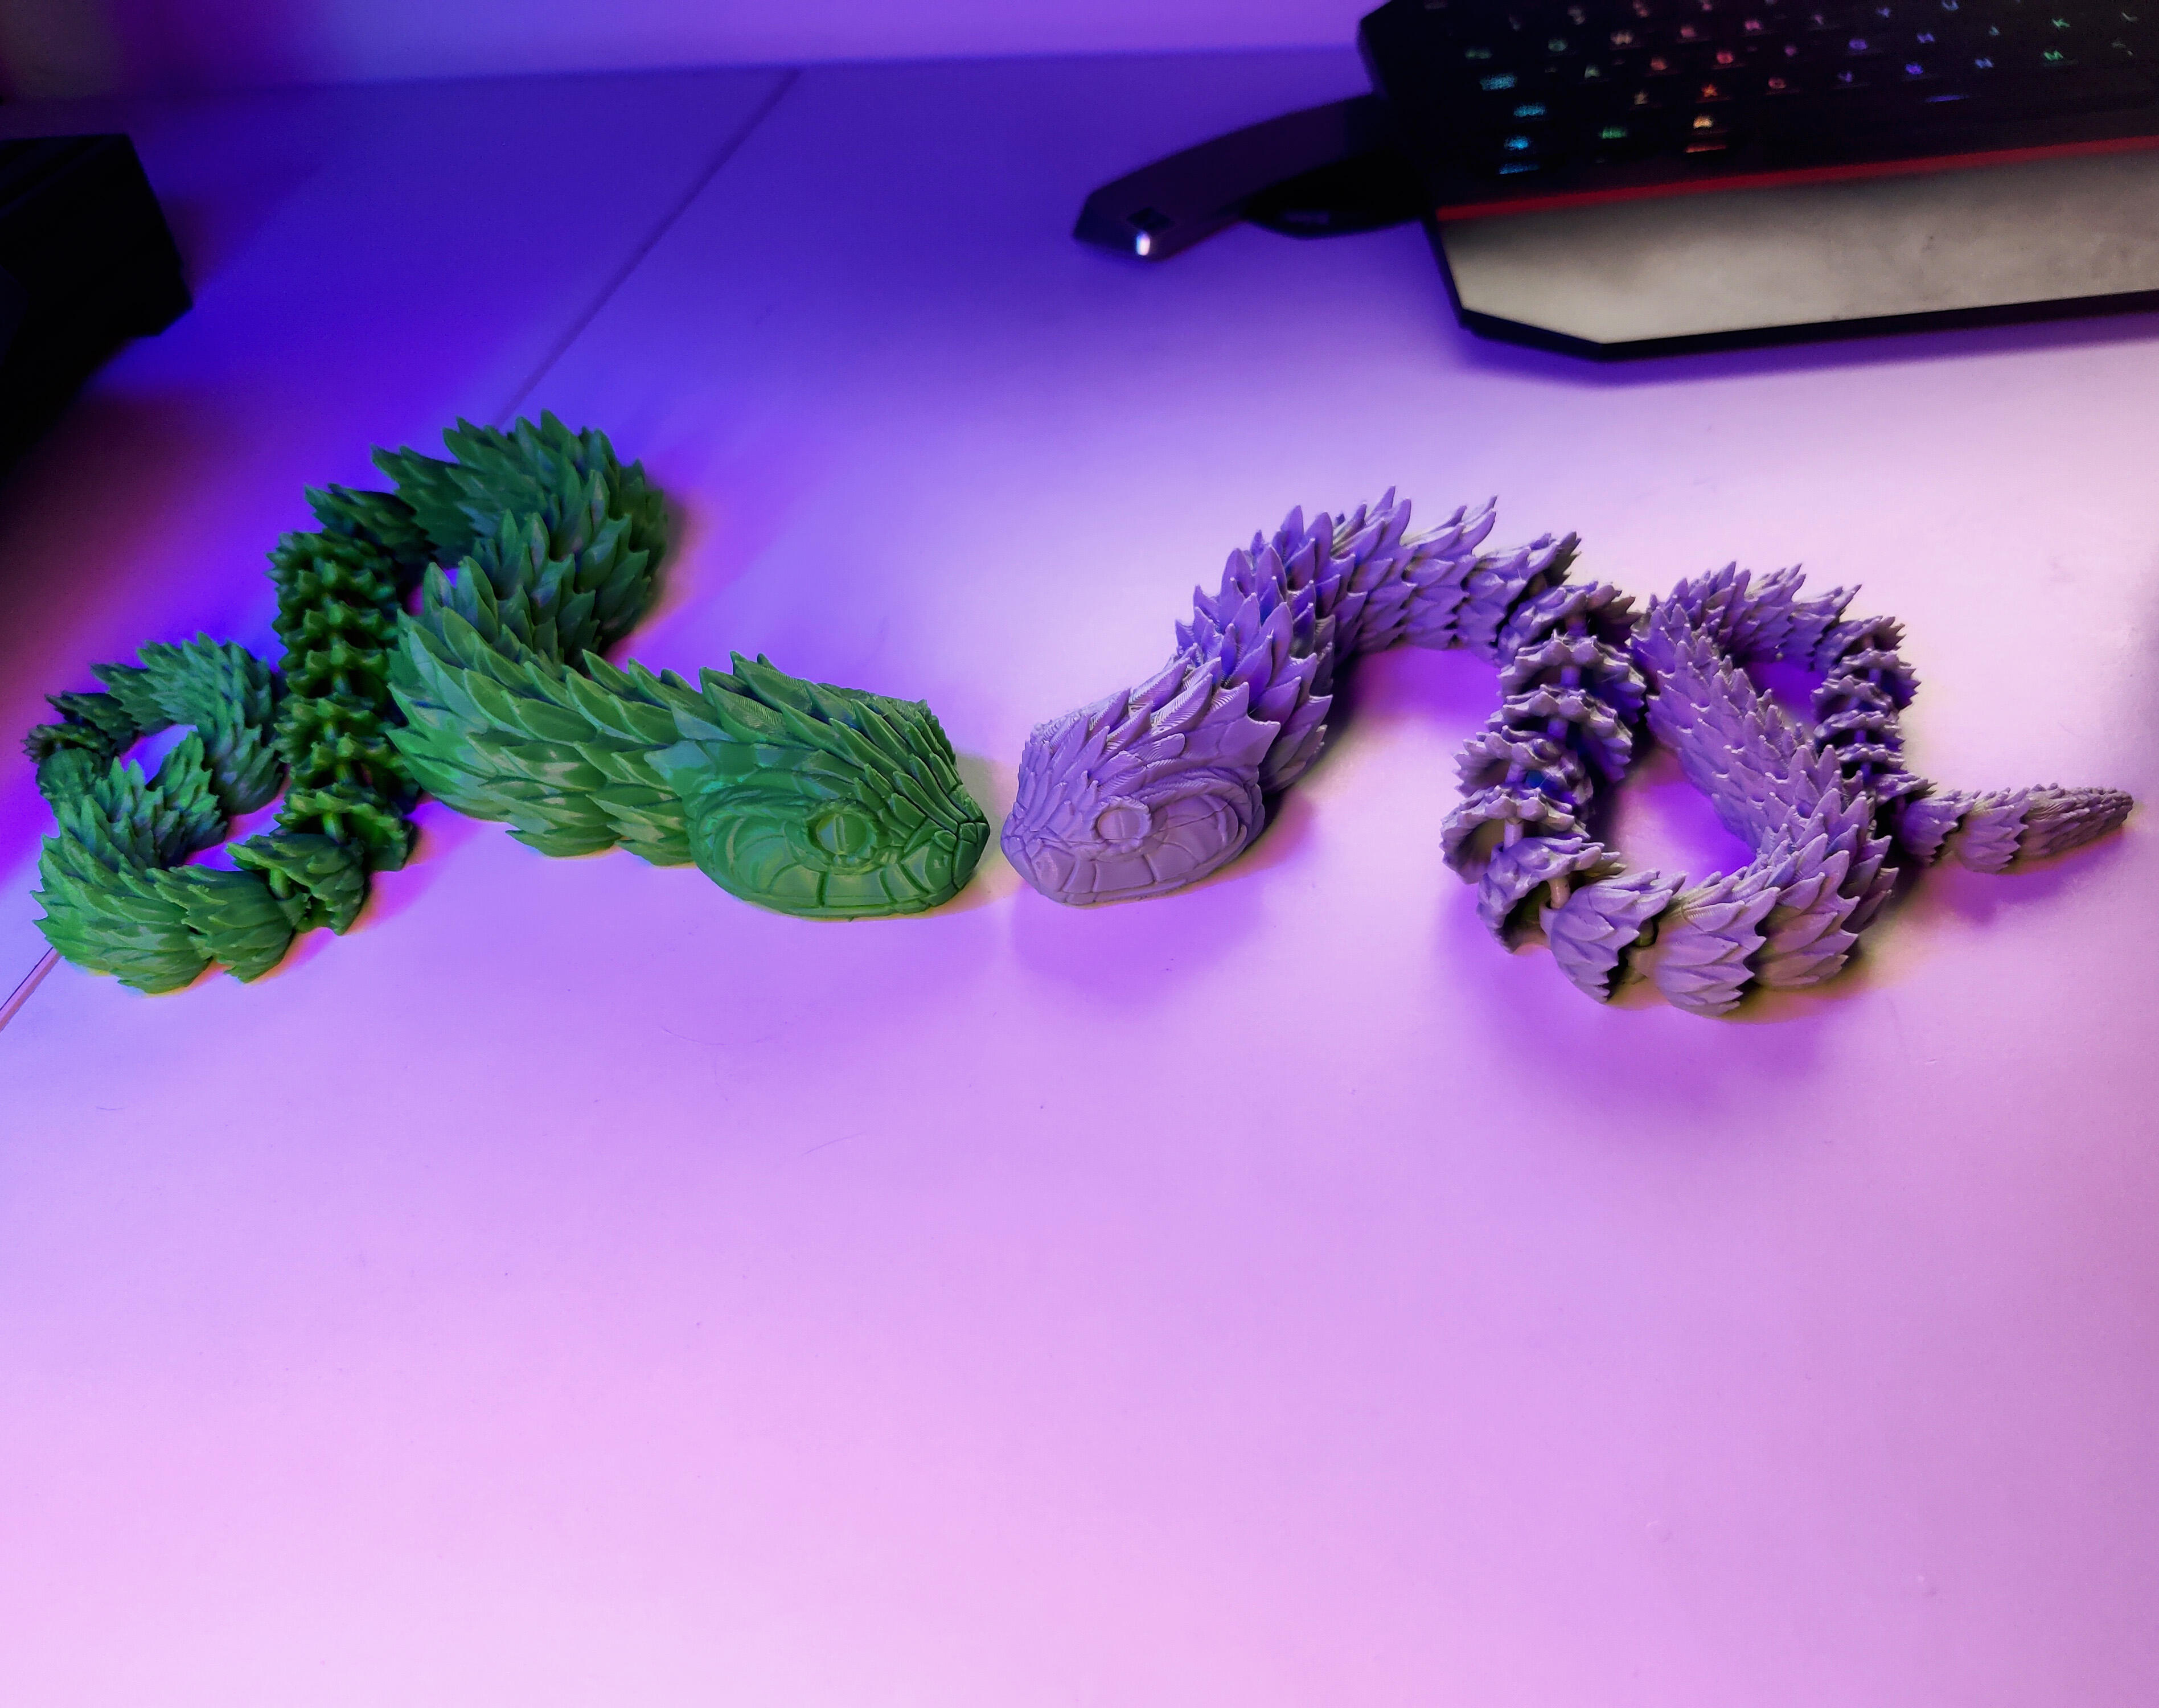 Articulated Bush Viper Toy - Dragon Snake 3D printed